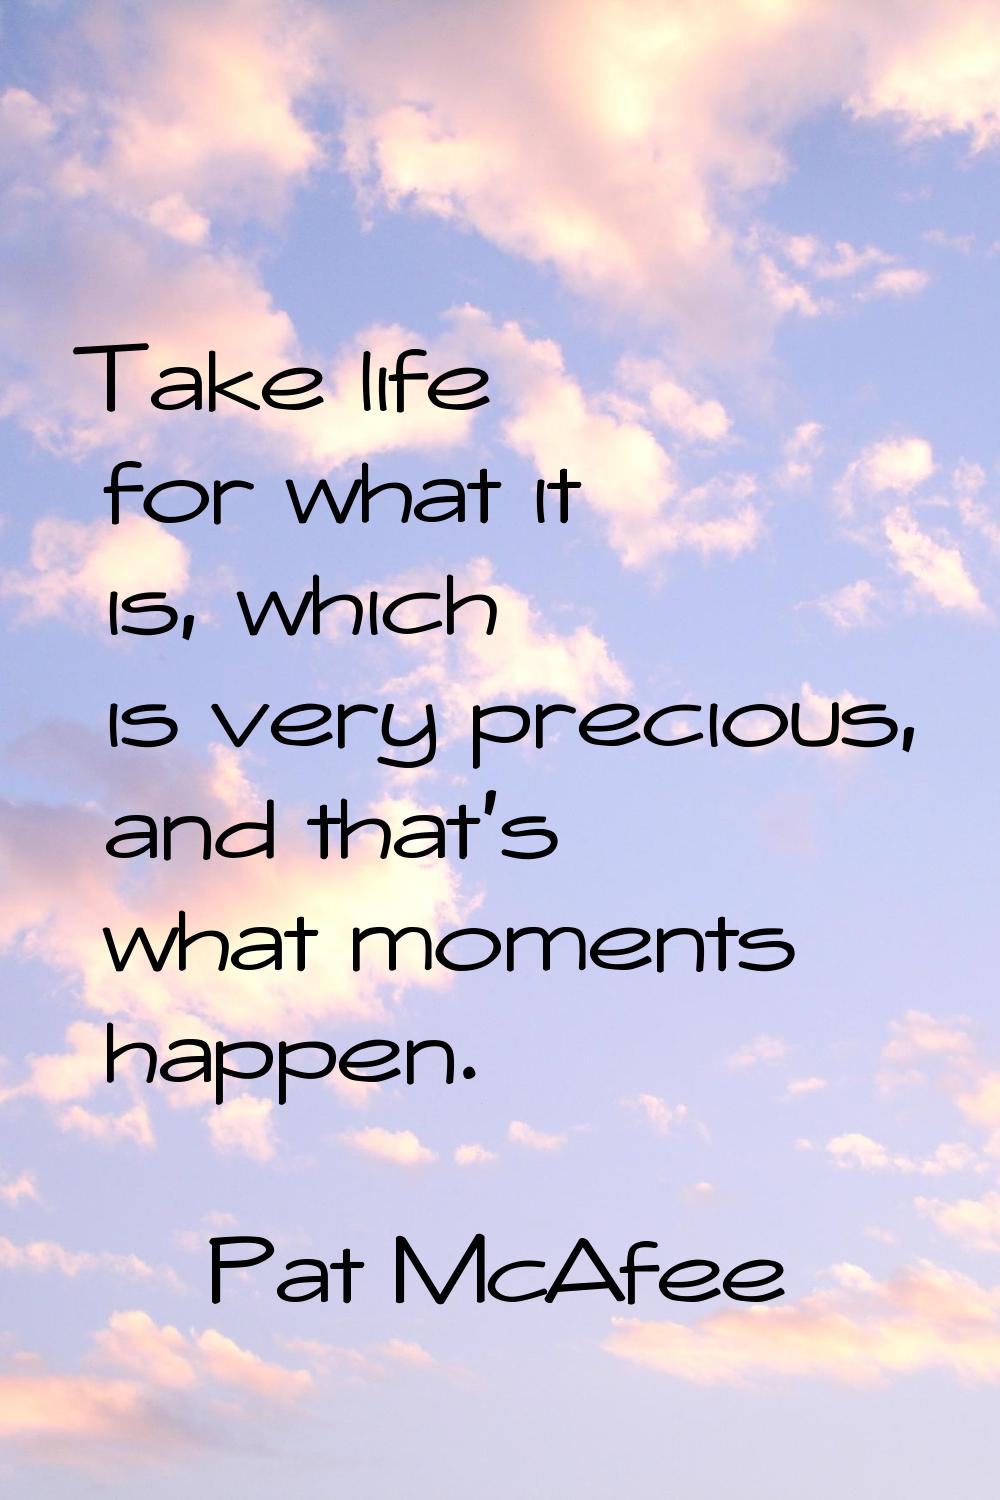 Take life for what it is, which is very precious, and that's what moments happen.